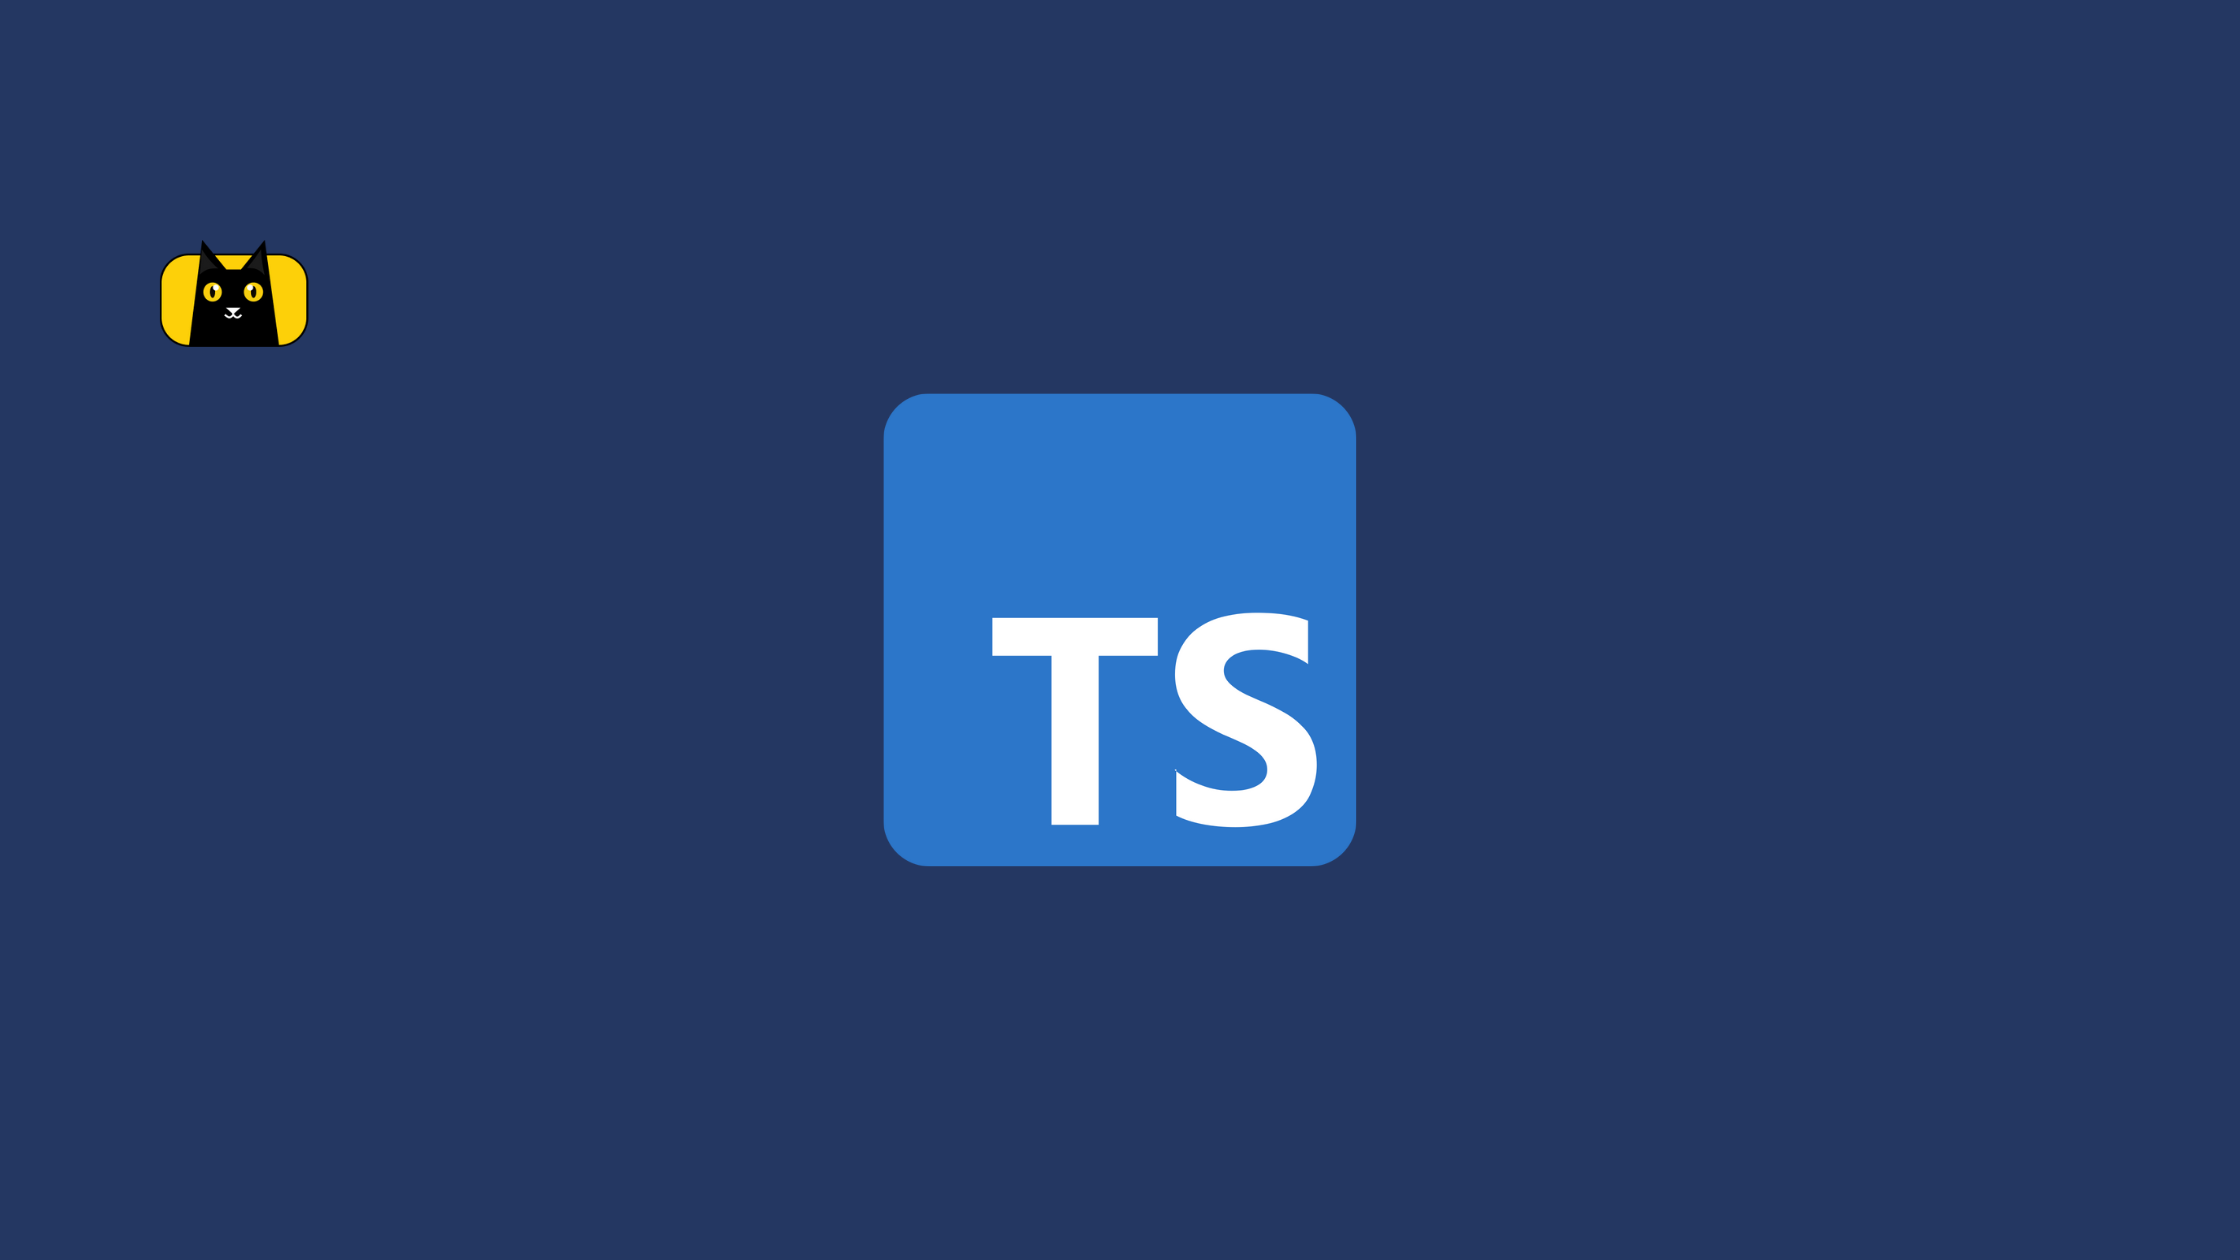 reactjs - How to extend JSX types for Typescript? - Stack Overflow